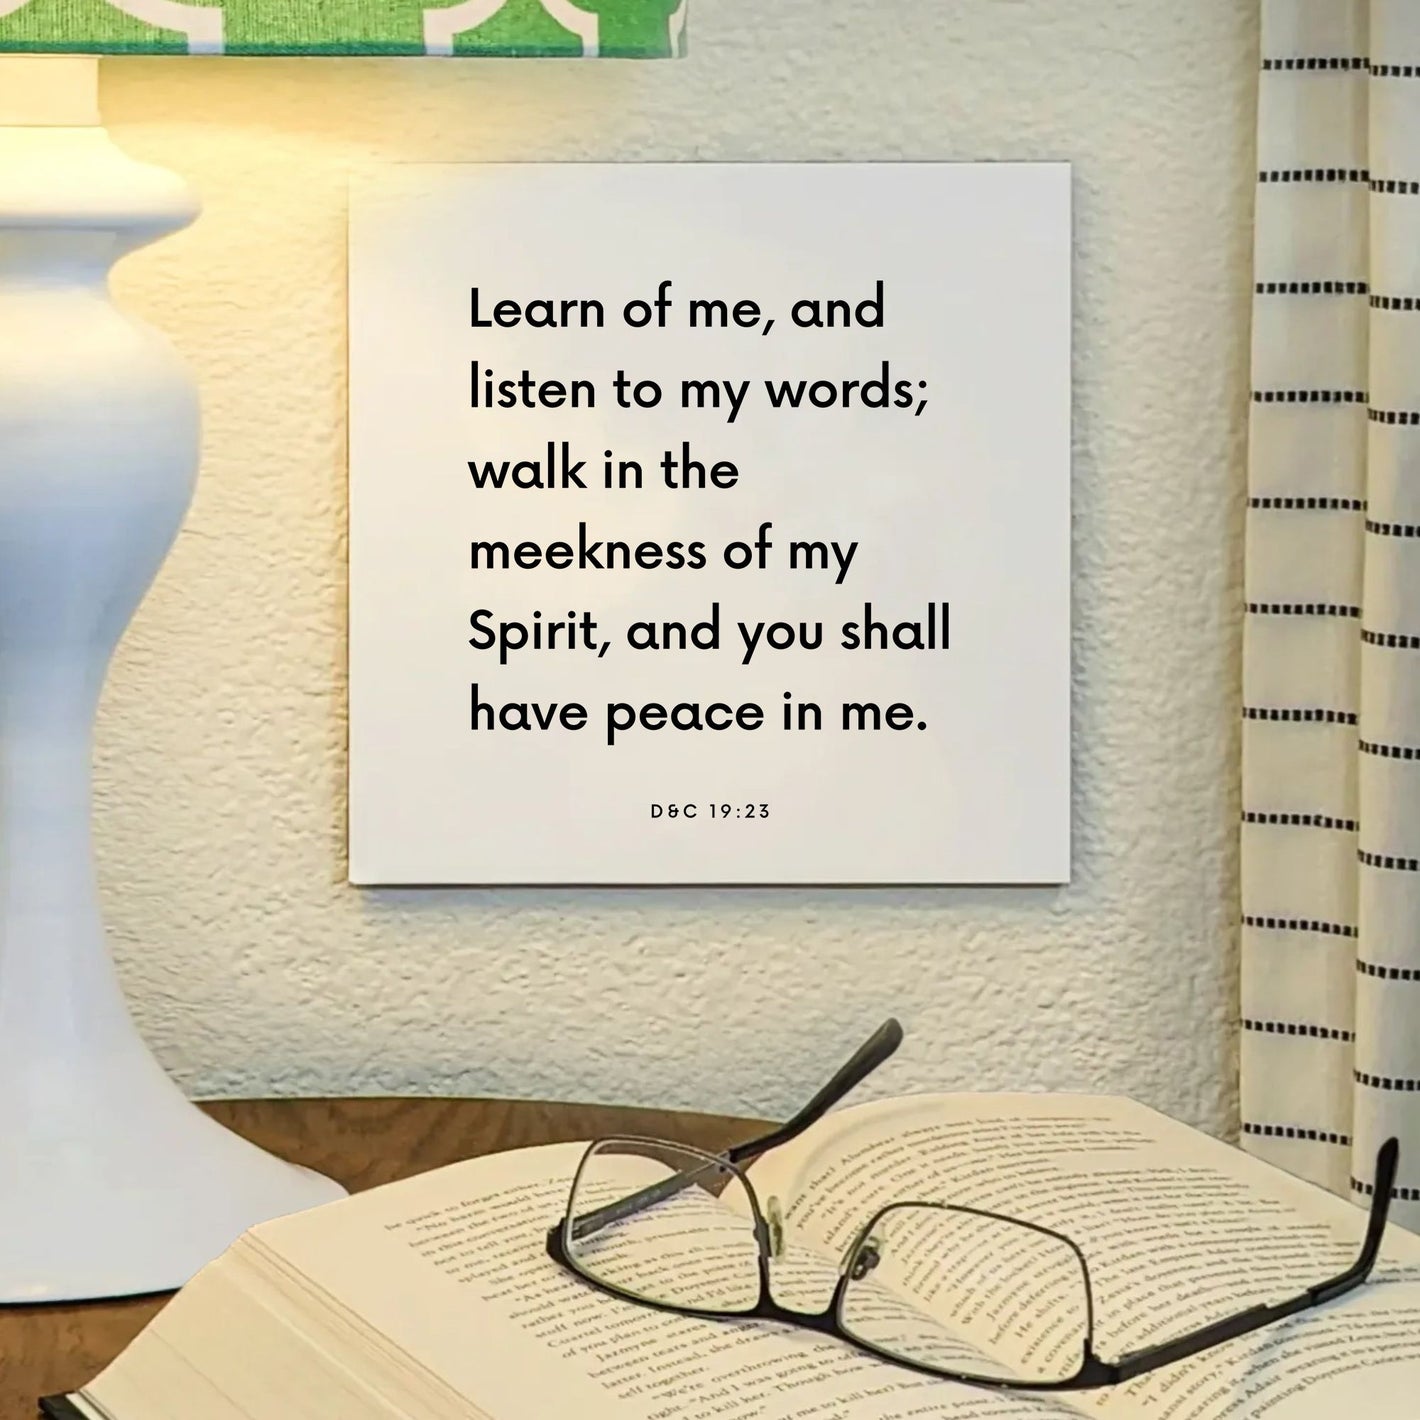 Lamp mouting of the scripture tile for D&C 19:23 - "Learn of me, and listen to my words"